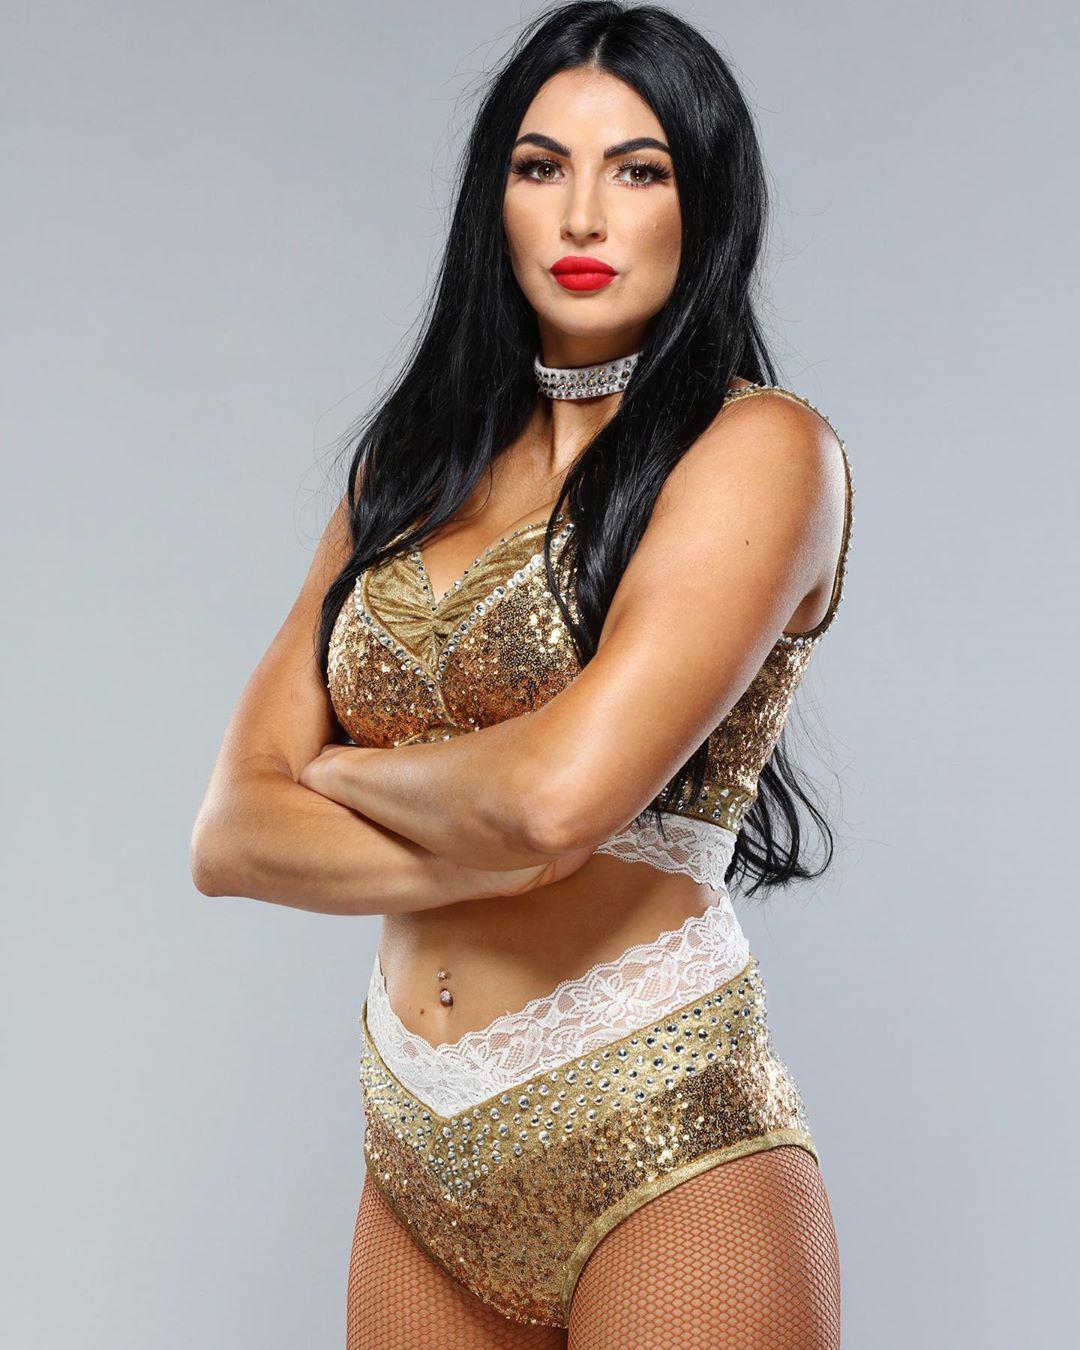 60+ Hot Pictures Of Billie Kay Will Rock The WWE Fan Inside You 173